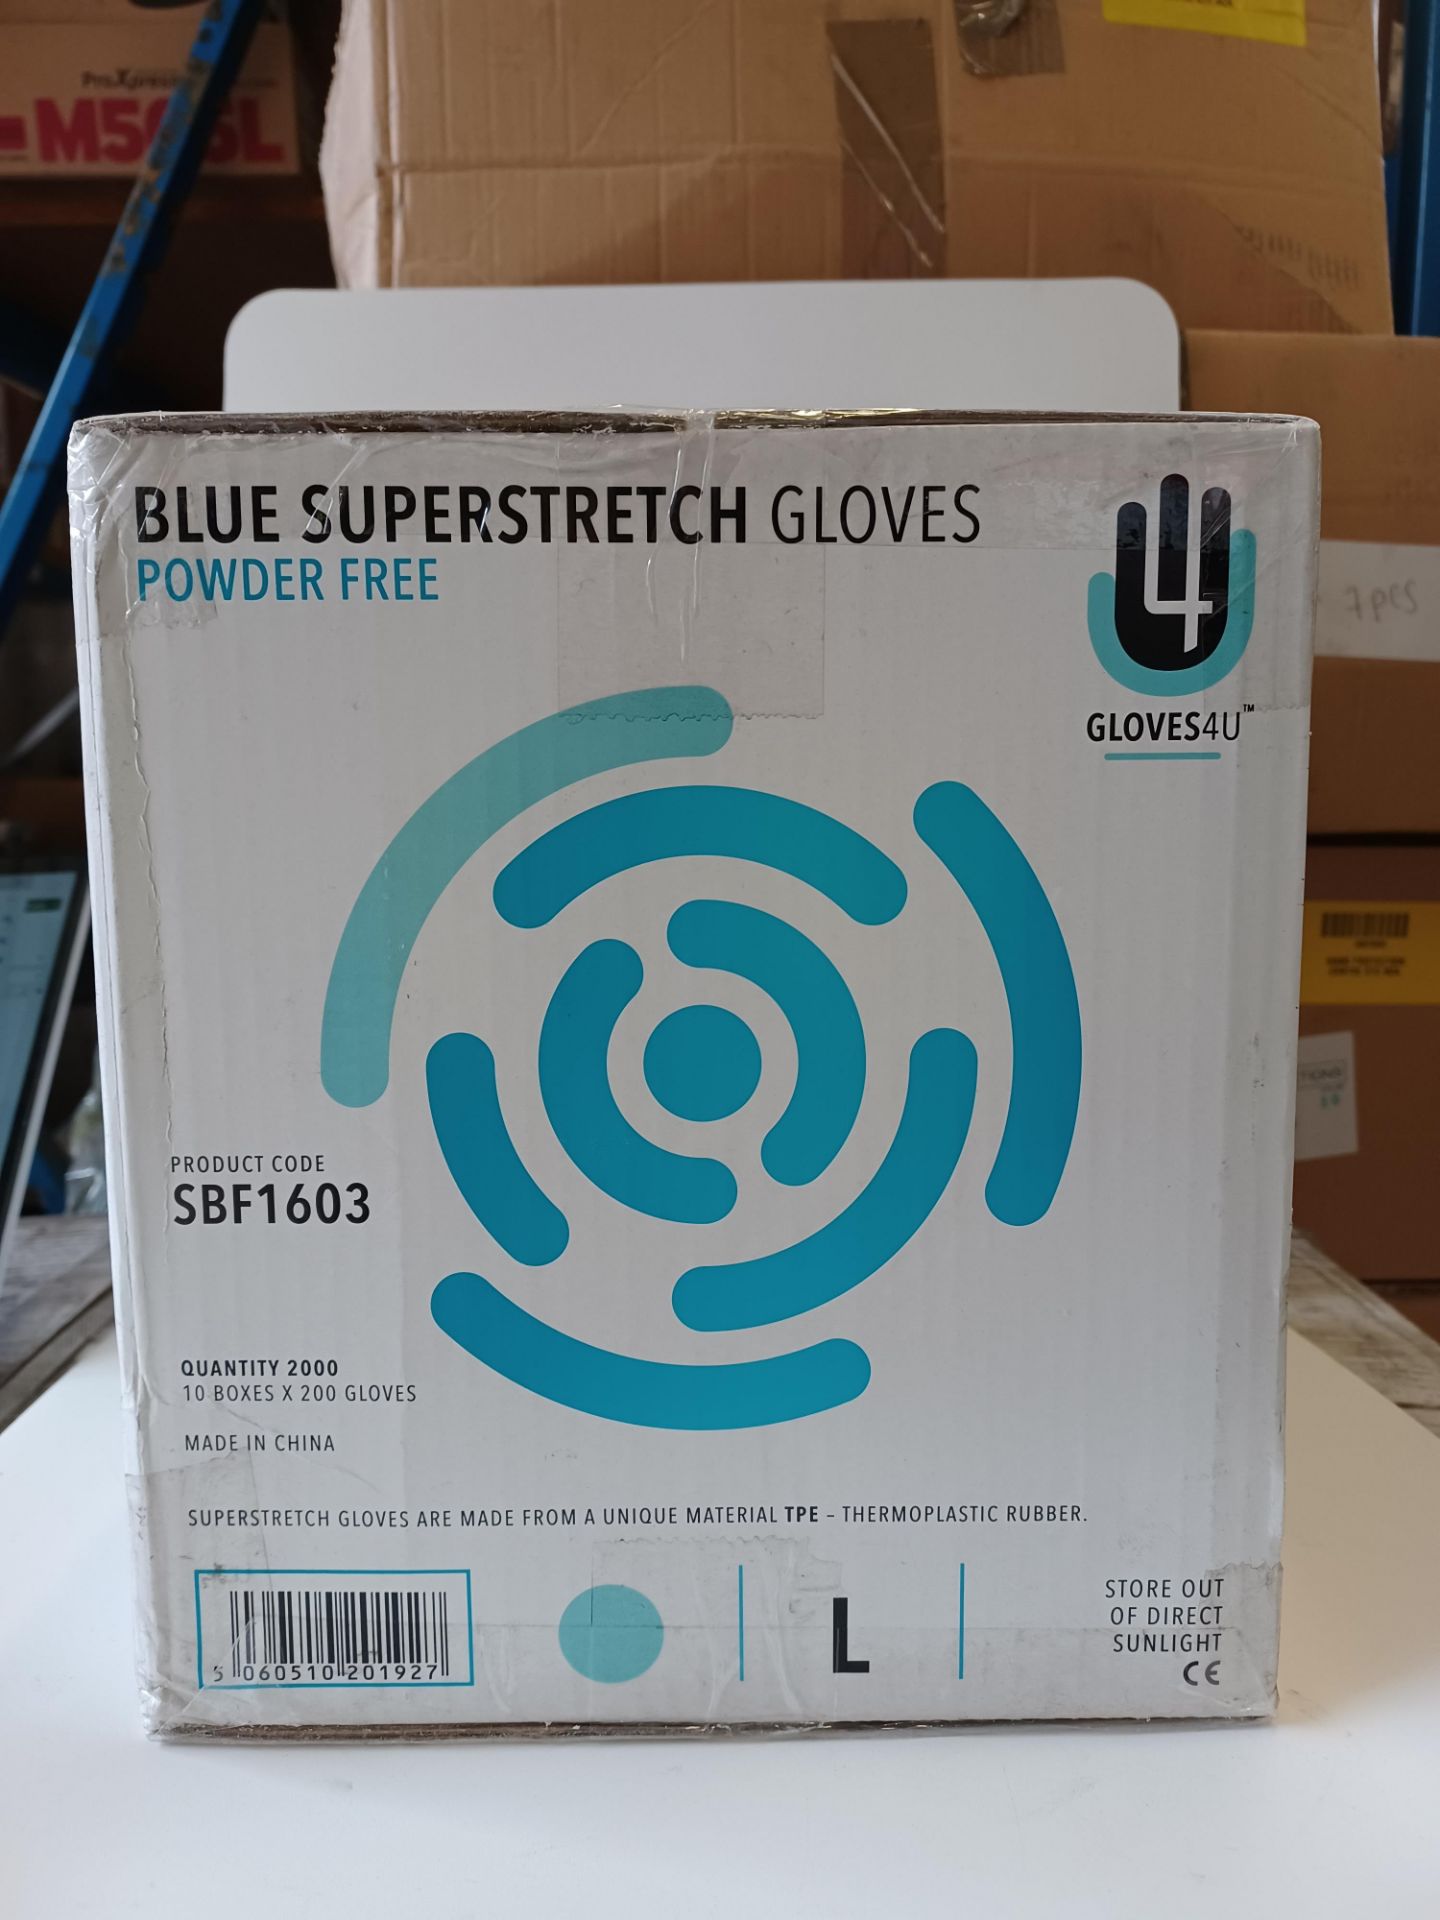 30 X NEW BOXES OF 100 BLUE SUPERSTRETH POWDER FREE WOKGLOVES. SIZE LARGE. S1-32